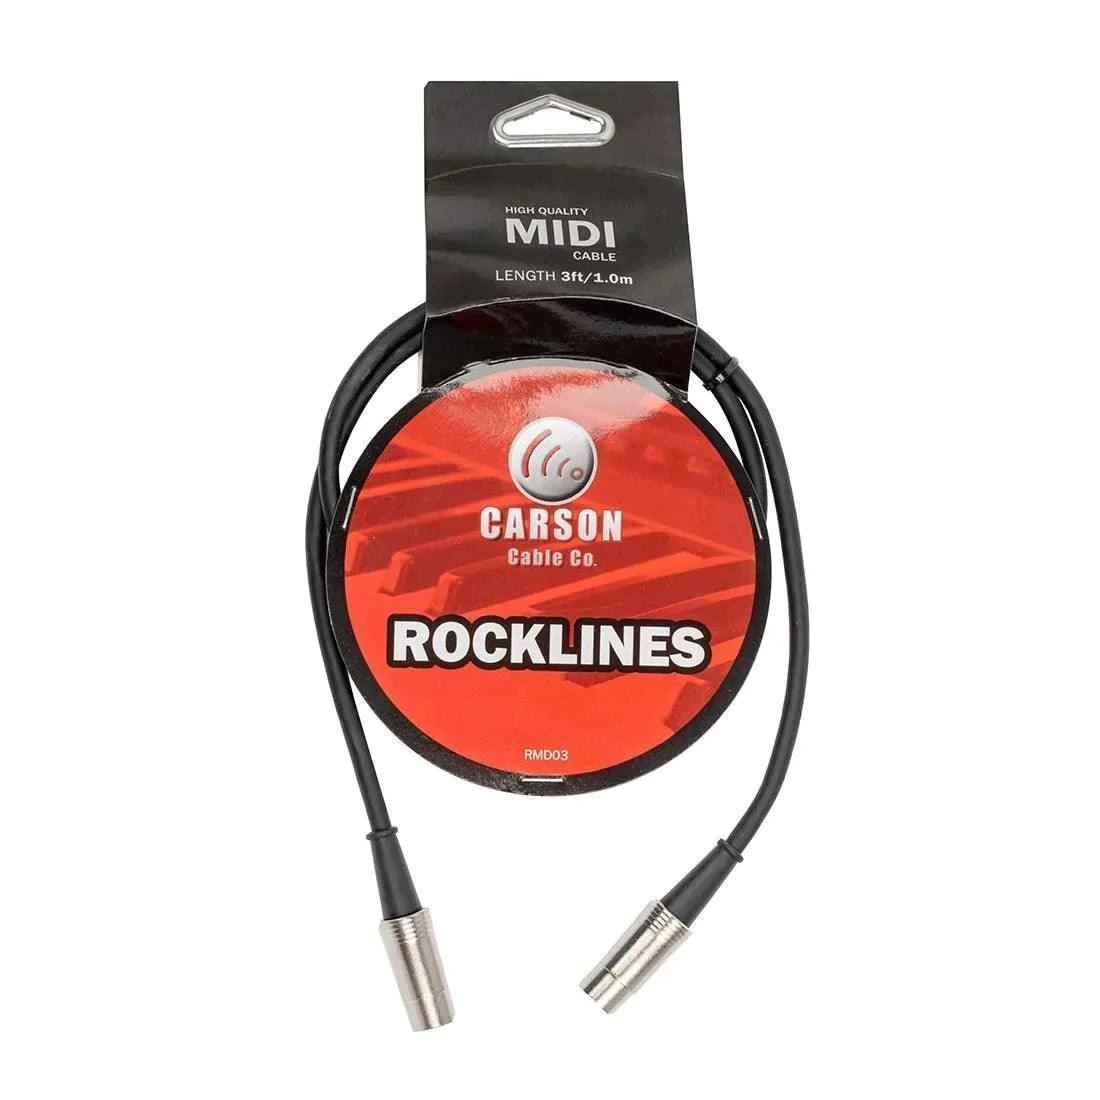 Carson RMD03 Rocklines 3ft Midi Cable, Chrome Plugs, 6mm O/D Black - Accessories - Cables & Adaptors by Carson at Muso's Stuff